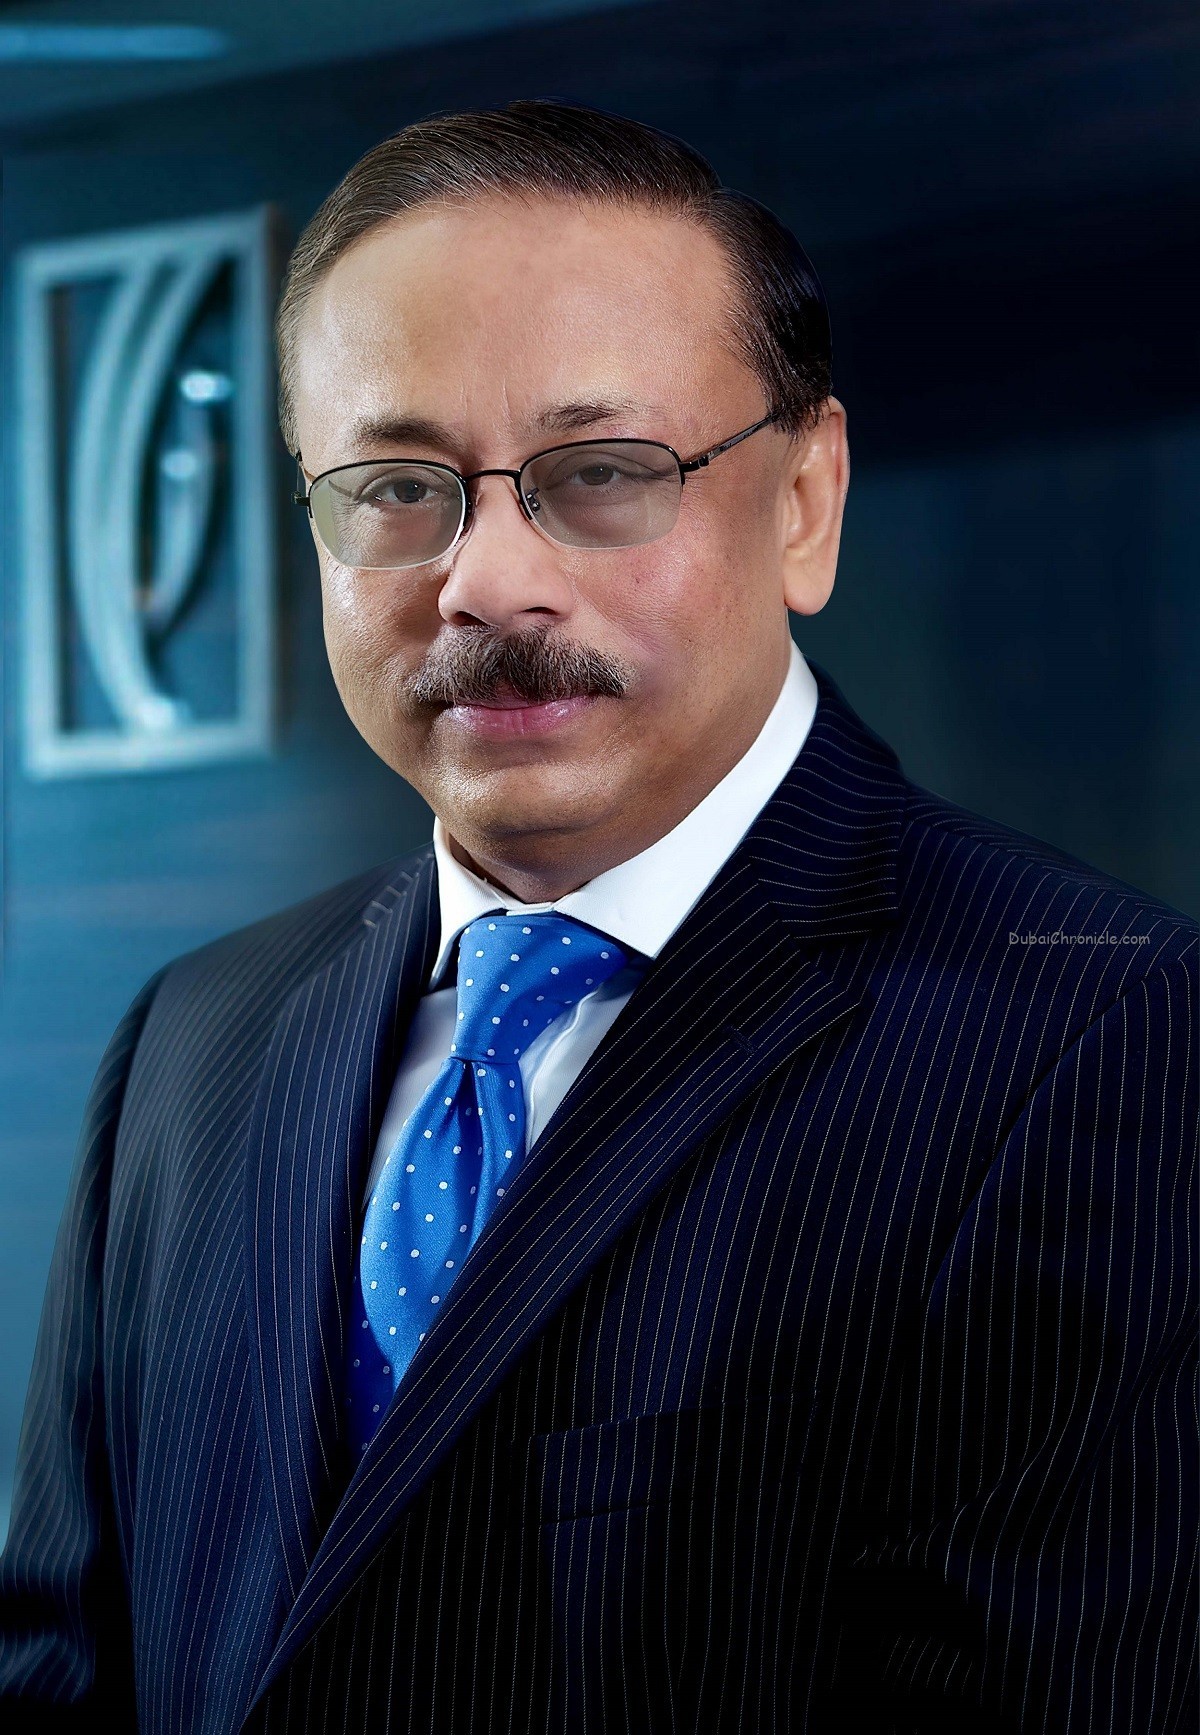 Suvo Sarkar, Senior Executive Vice President and Head of Retail Banking and Wealth Management, Emirates NBD